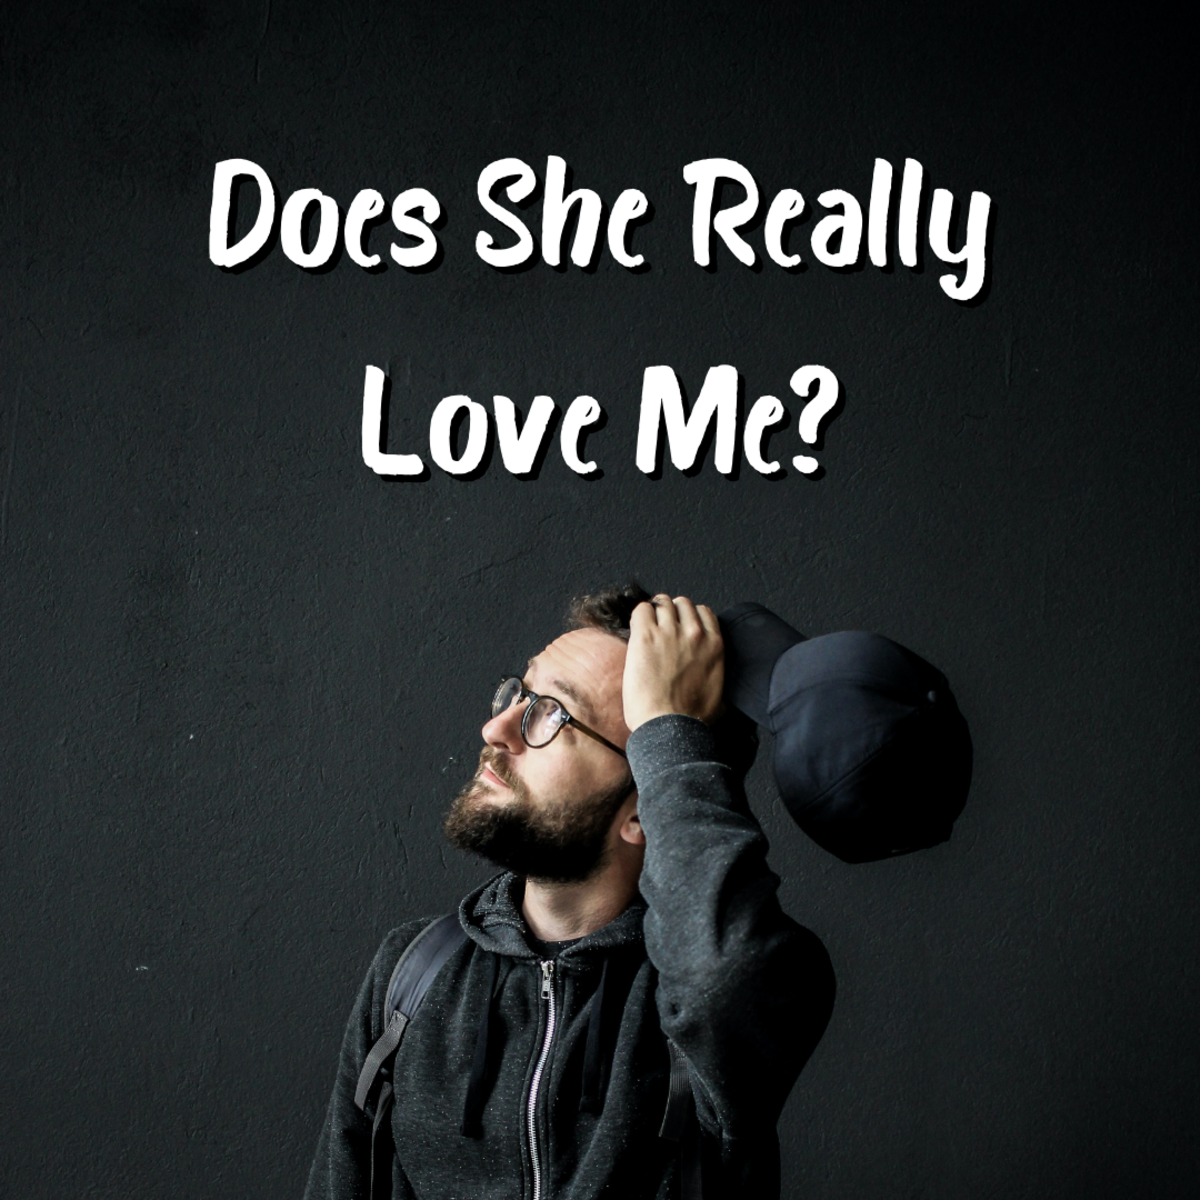 Are you unsure whether a woman truly loves you? Read on to learn the 5 major signs that her love is real.